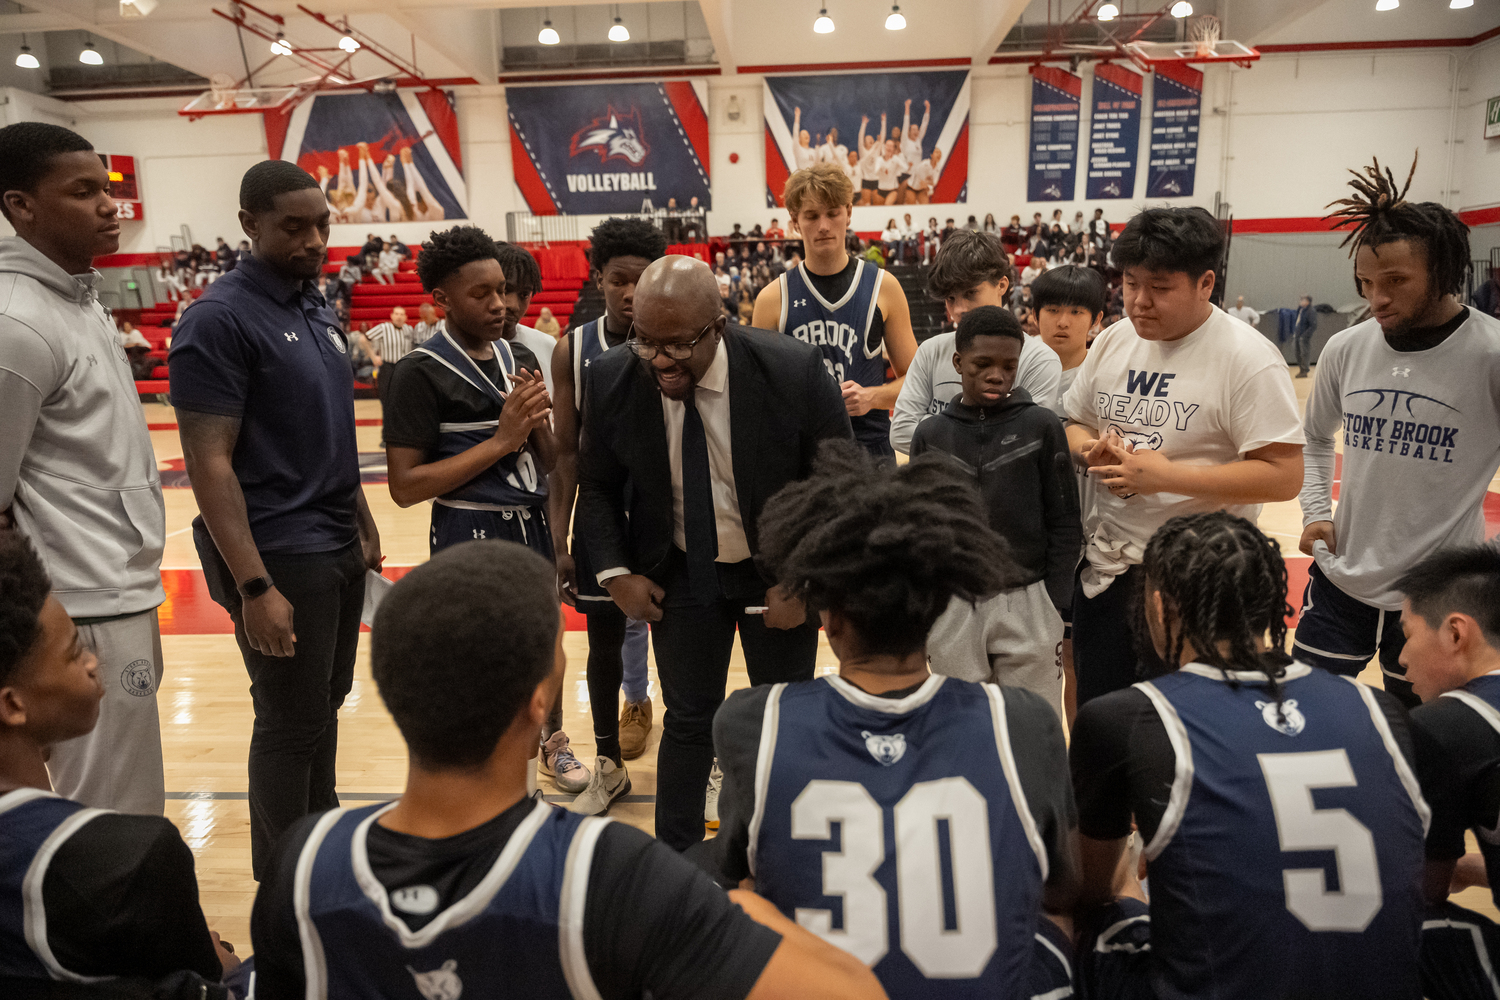 Ron White's Stony Brook School Bears reached the championship of the PSAA in his first season as head coach.   RON ESPOSITO